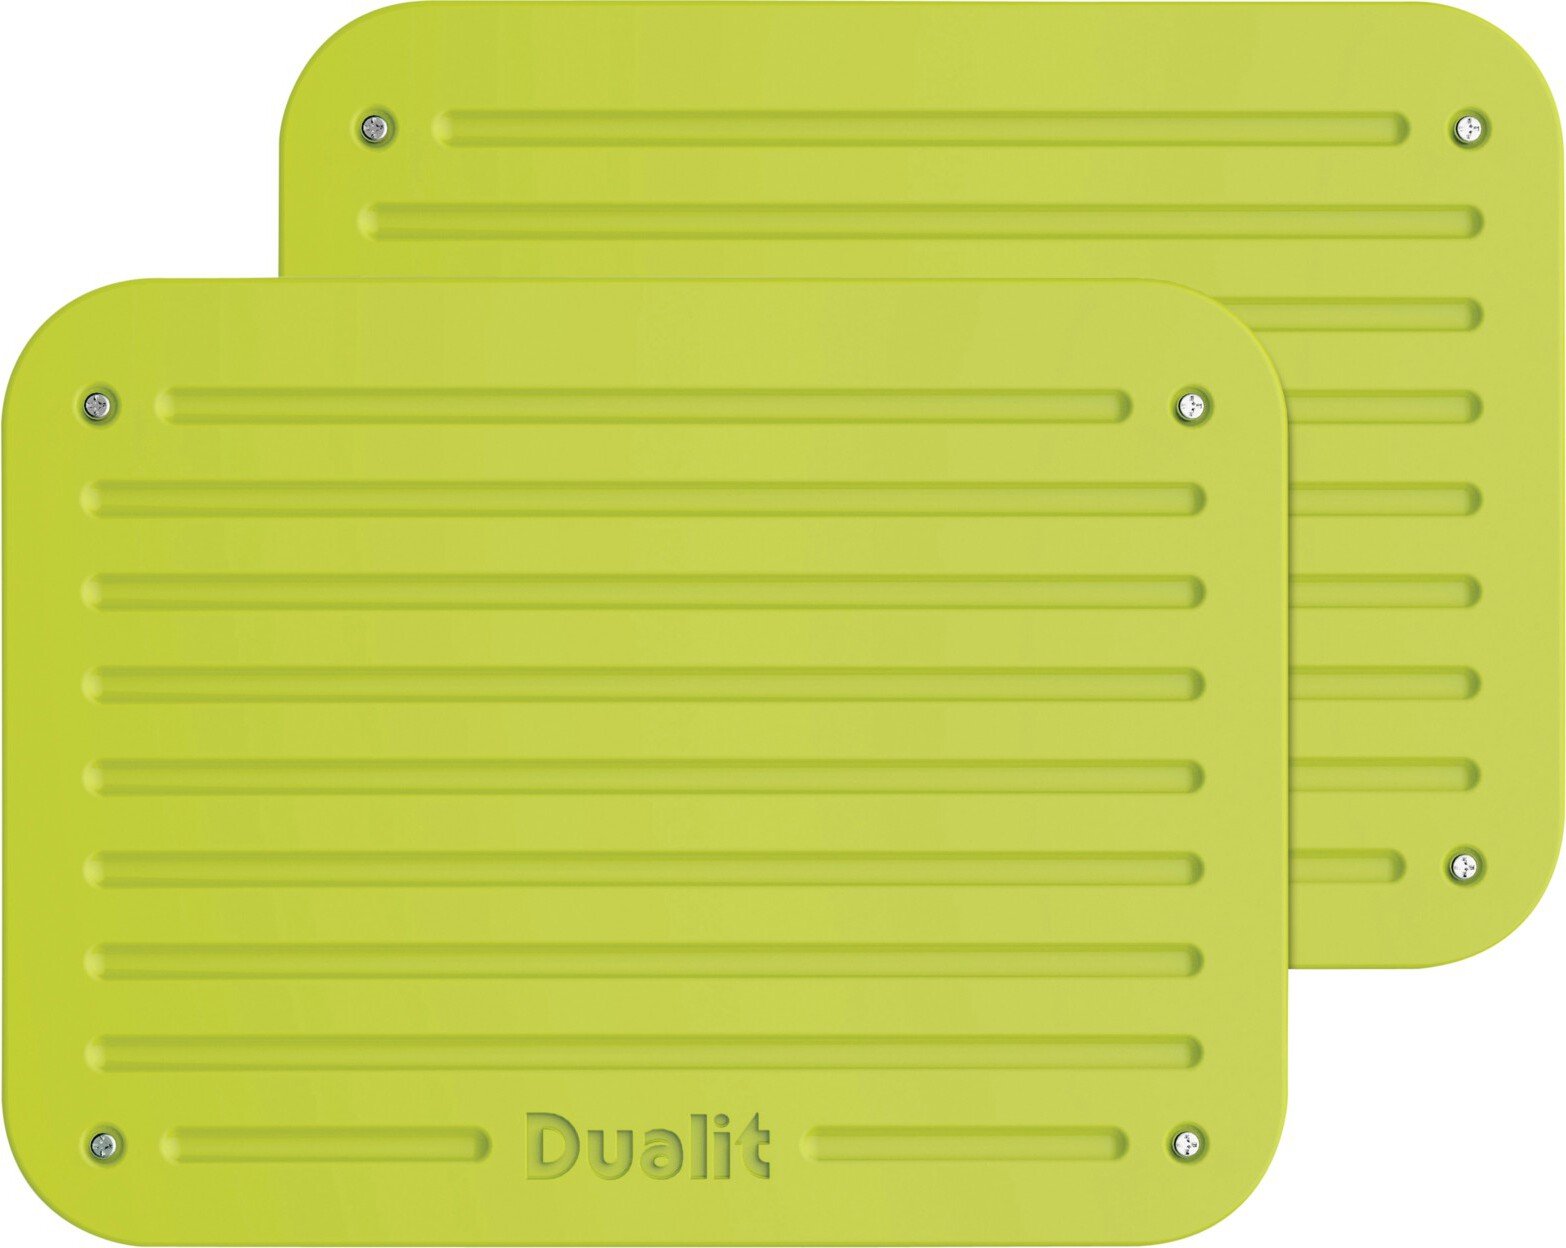 Dualit - Design Series / Architect Series Toaster Panel Kit Lime Green (2 or 4 Slice) - DUP16008